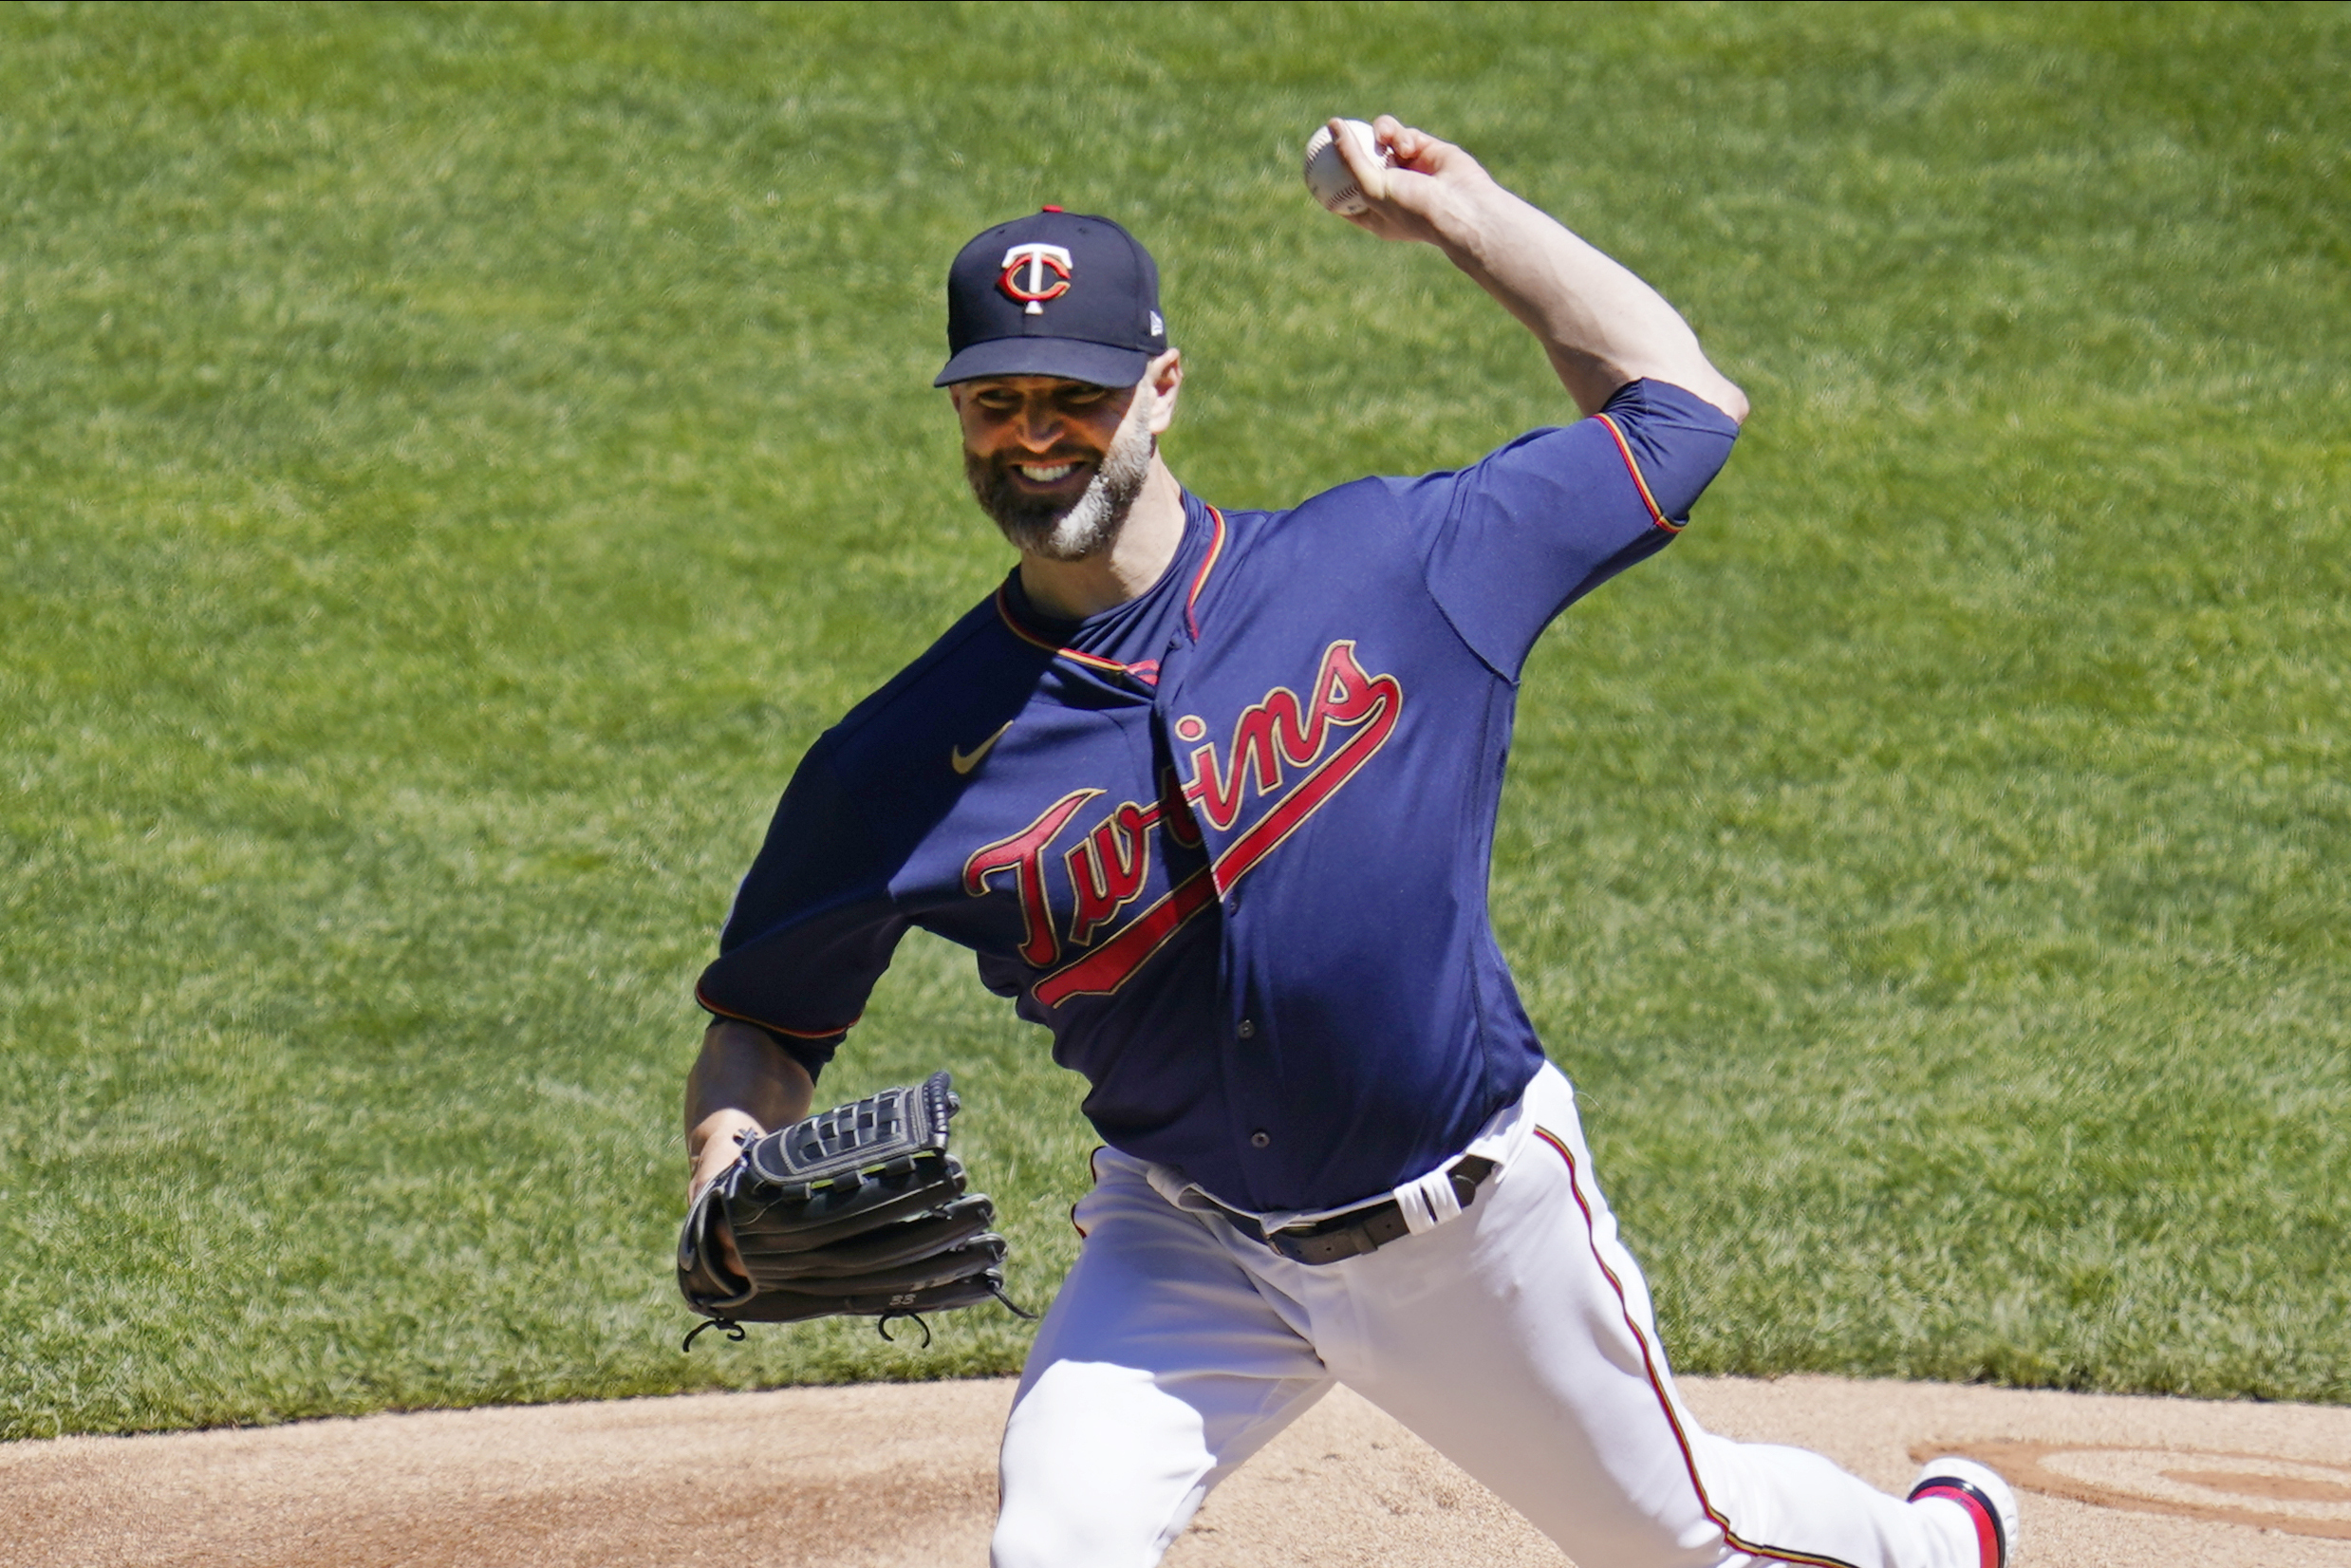 Struggling Twins starter Happ to Cardinals for reliever Gant